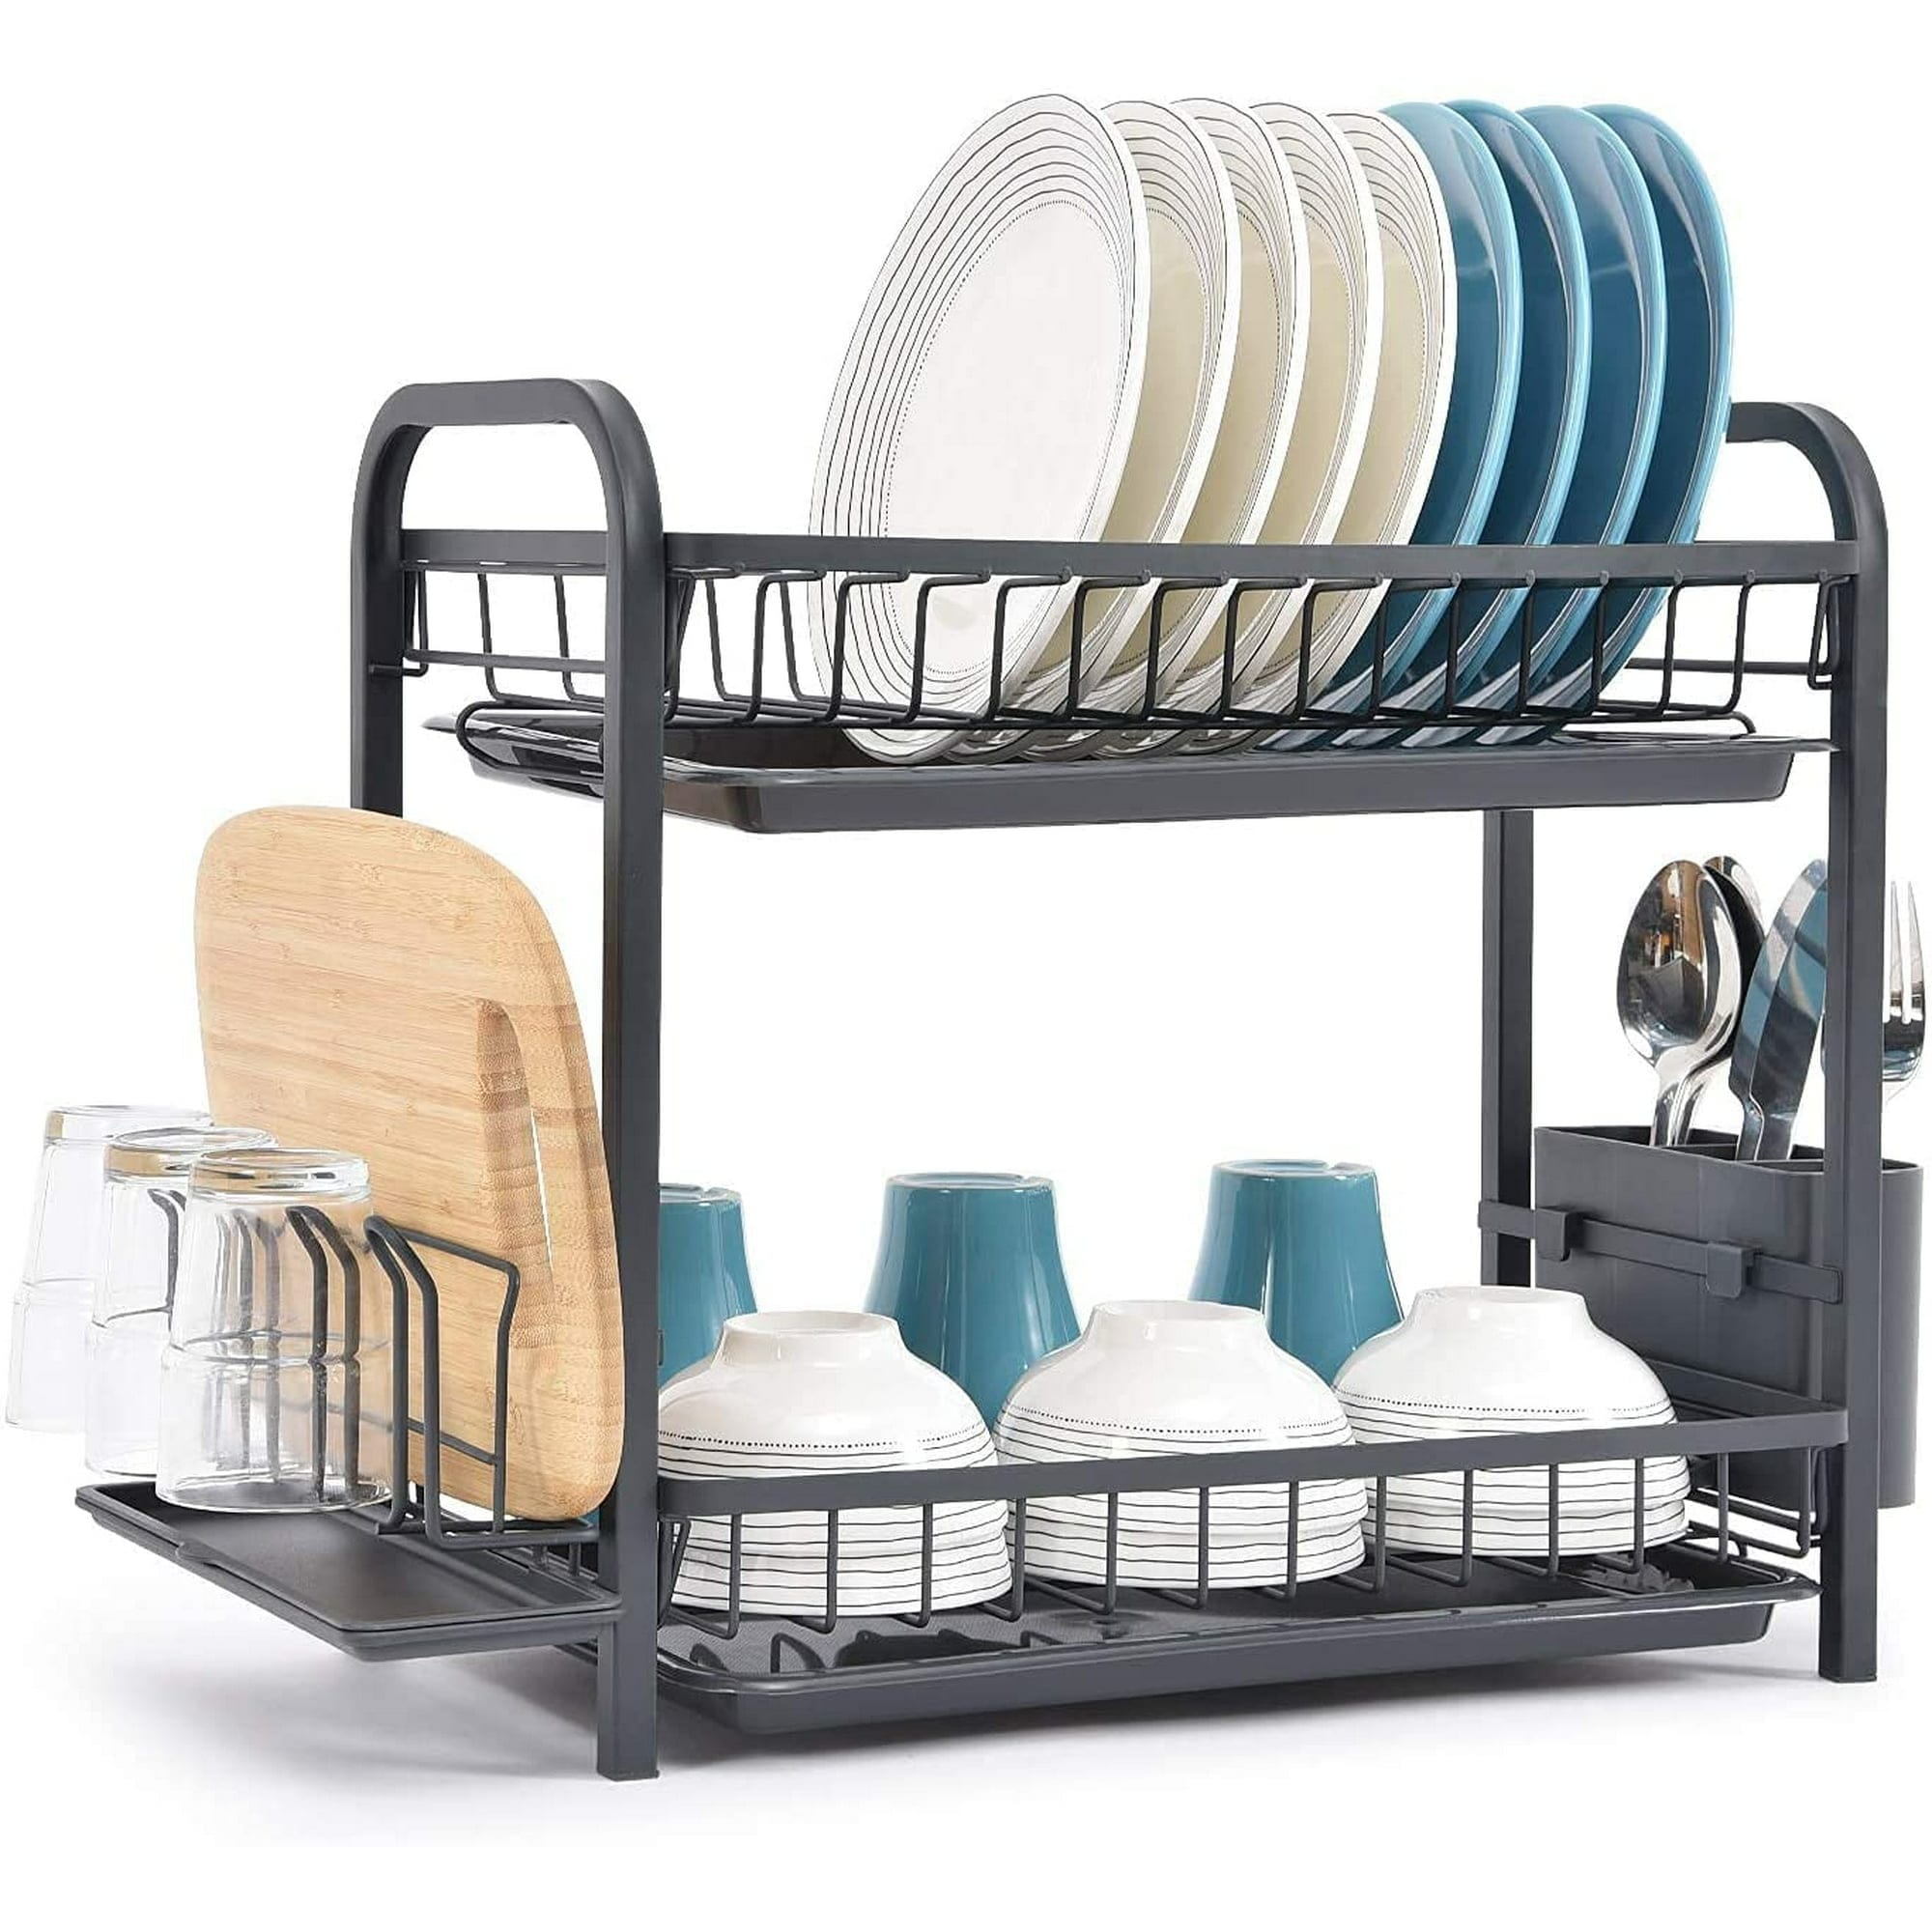 2 Tier Dish Rack with Drainer Board - Bed Bath & Beyond - 37482094